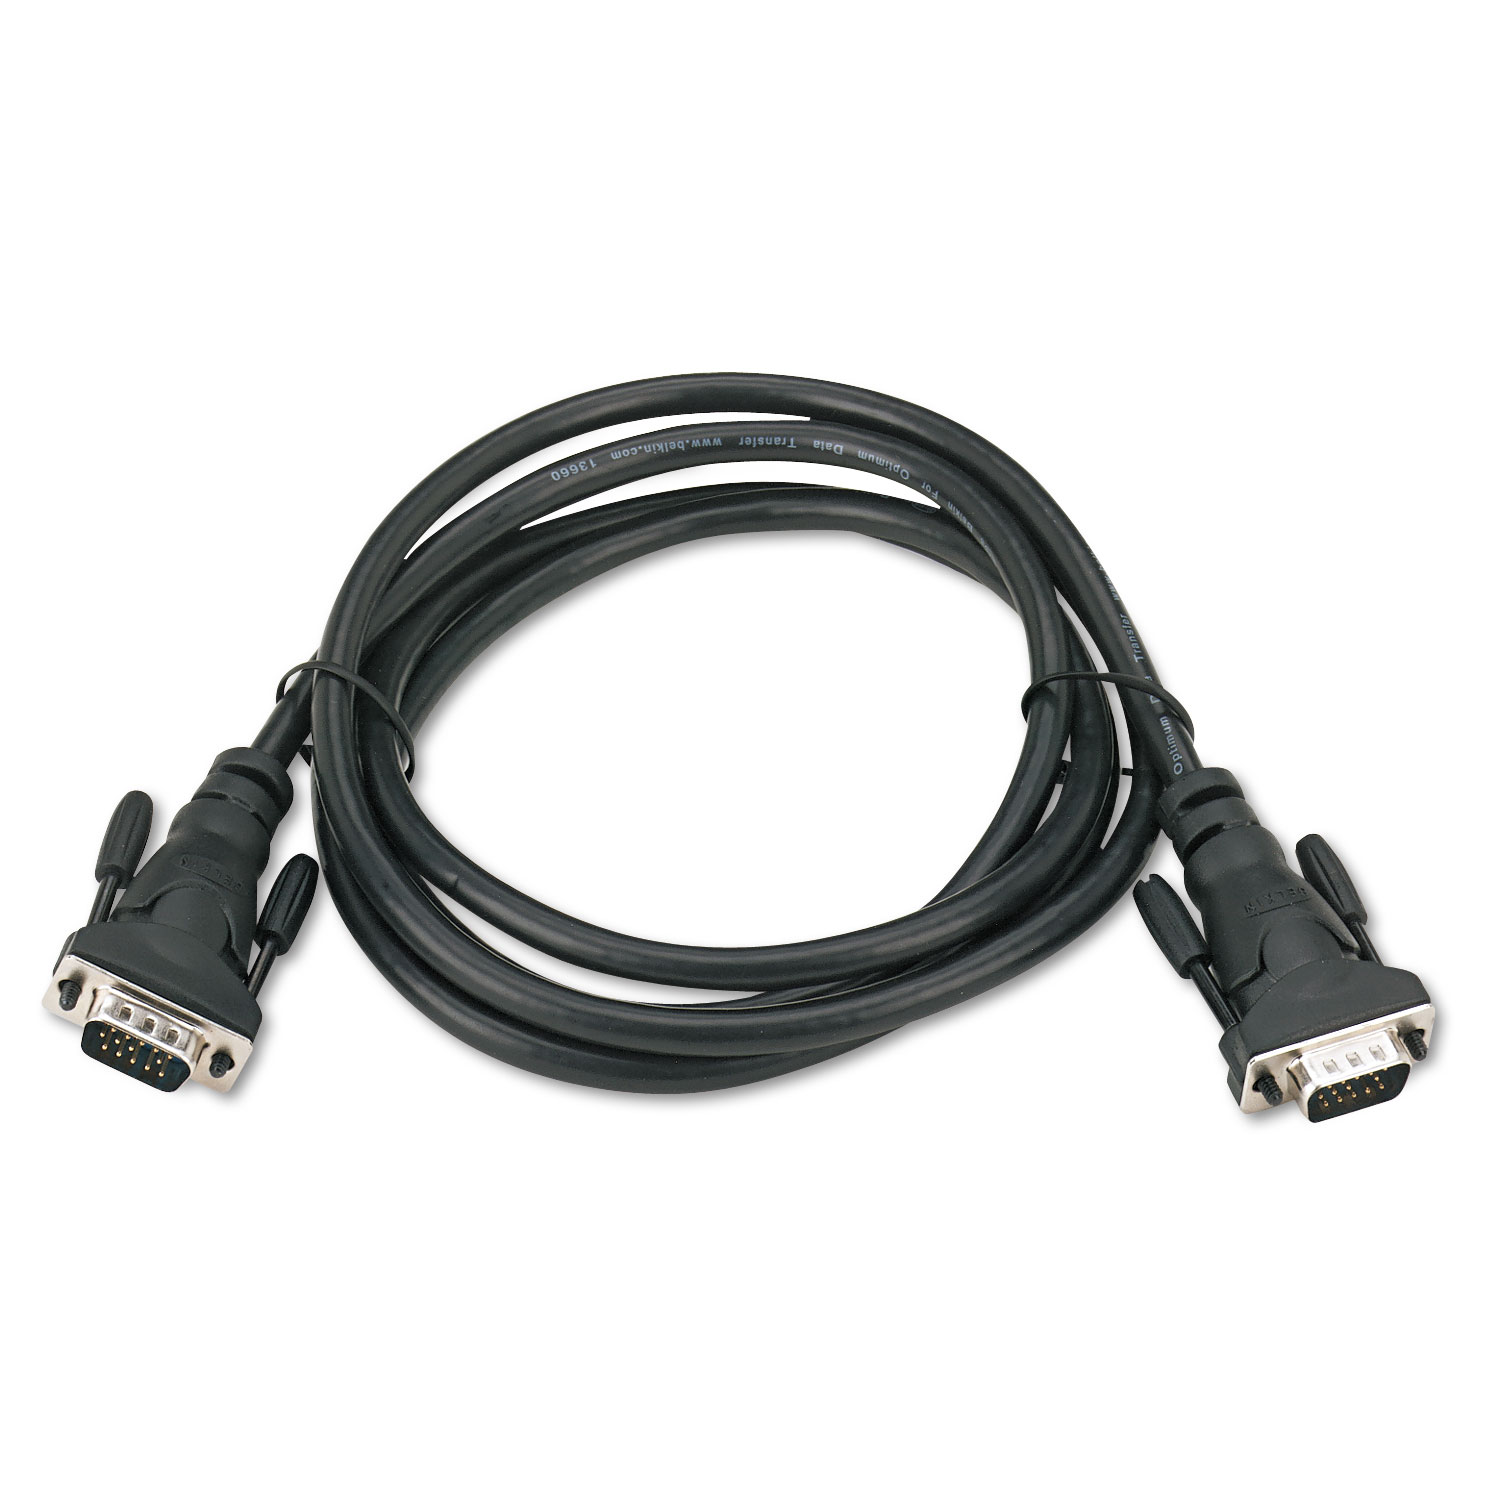  Belkin F3H982-06 Pro Series High-Integrity VGA/SVGA Monitor Cable, HDDB15 Connectors, 6 ft. (BLKF3H98206) 